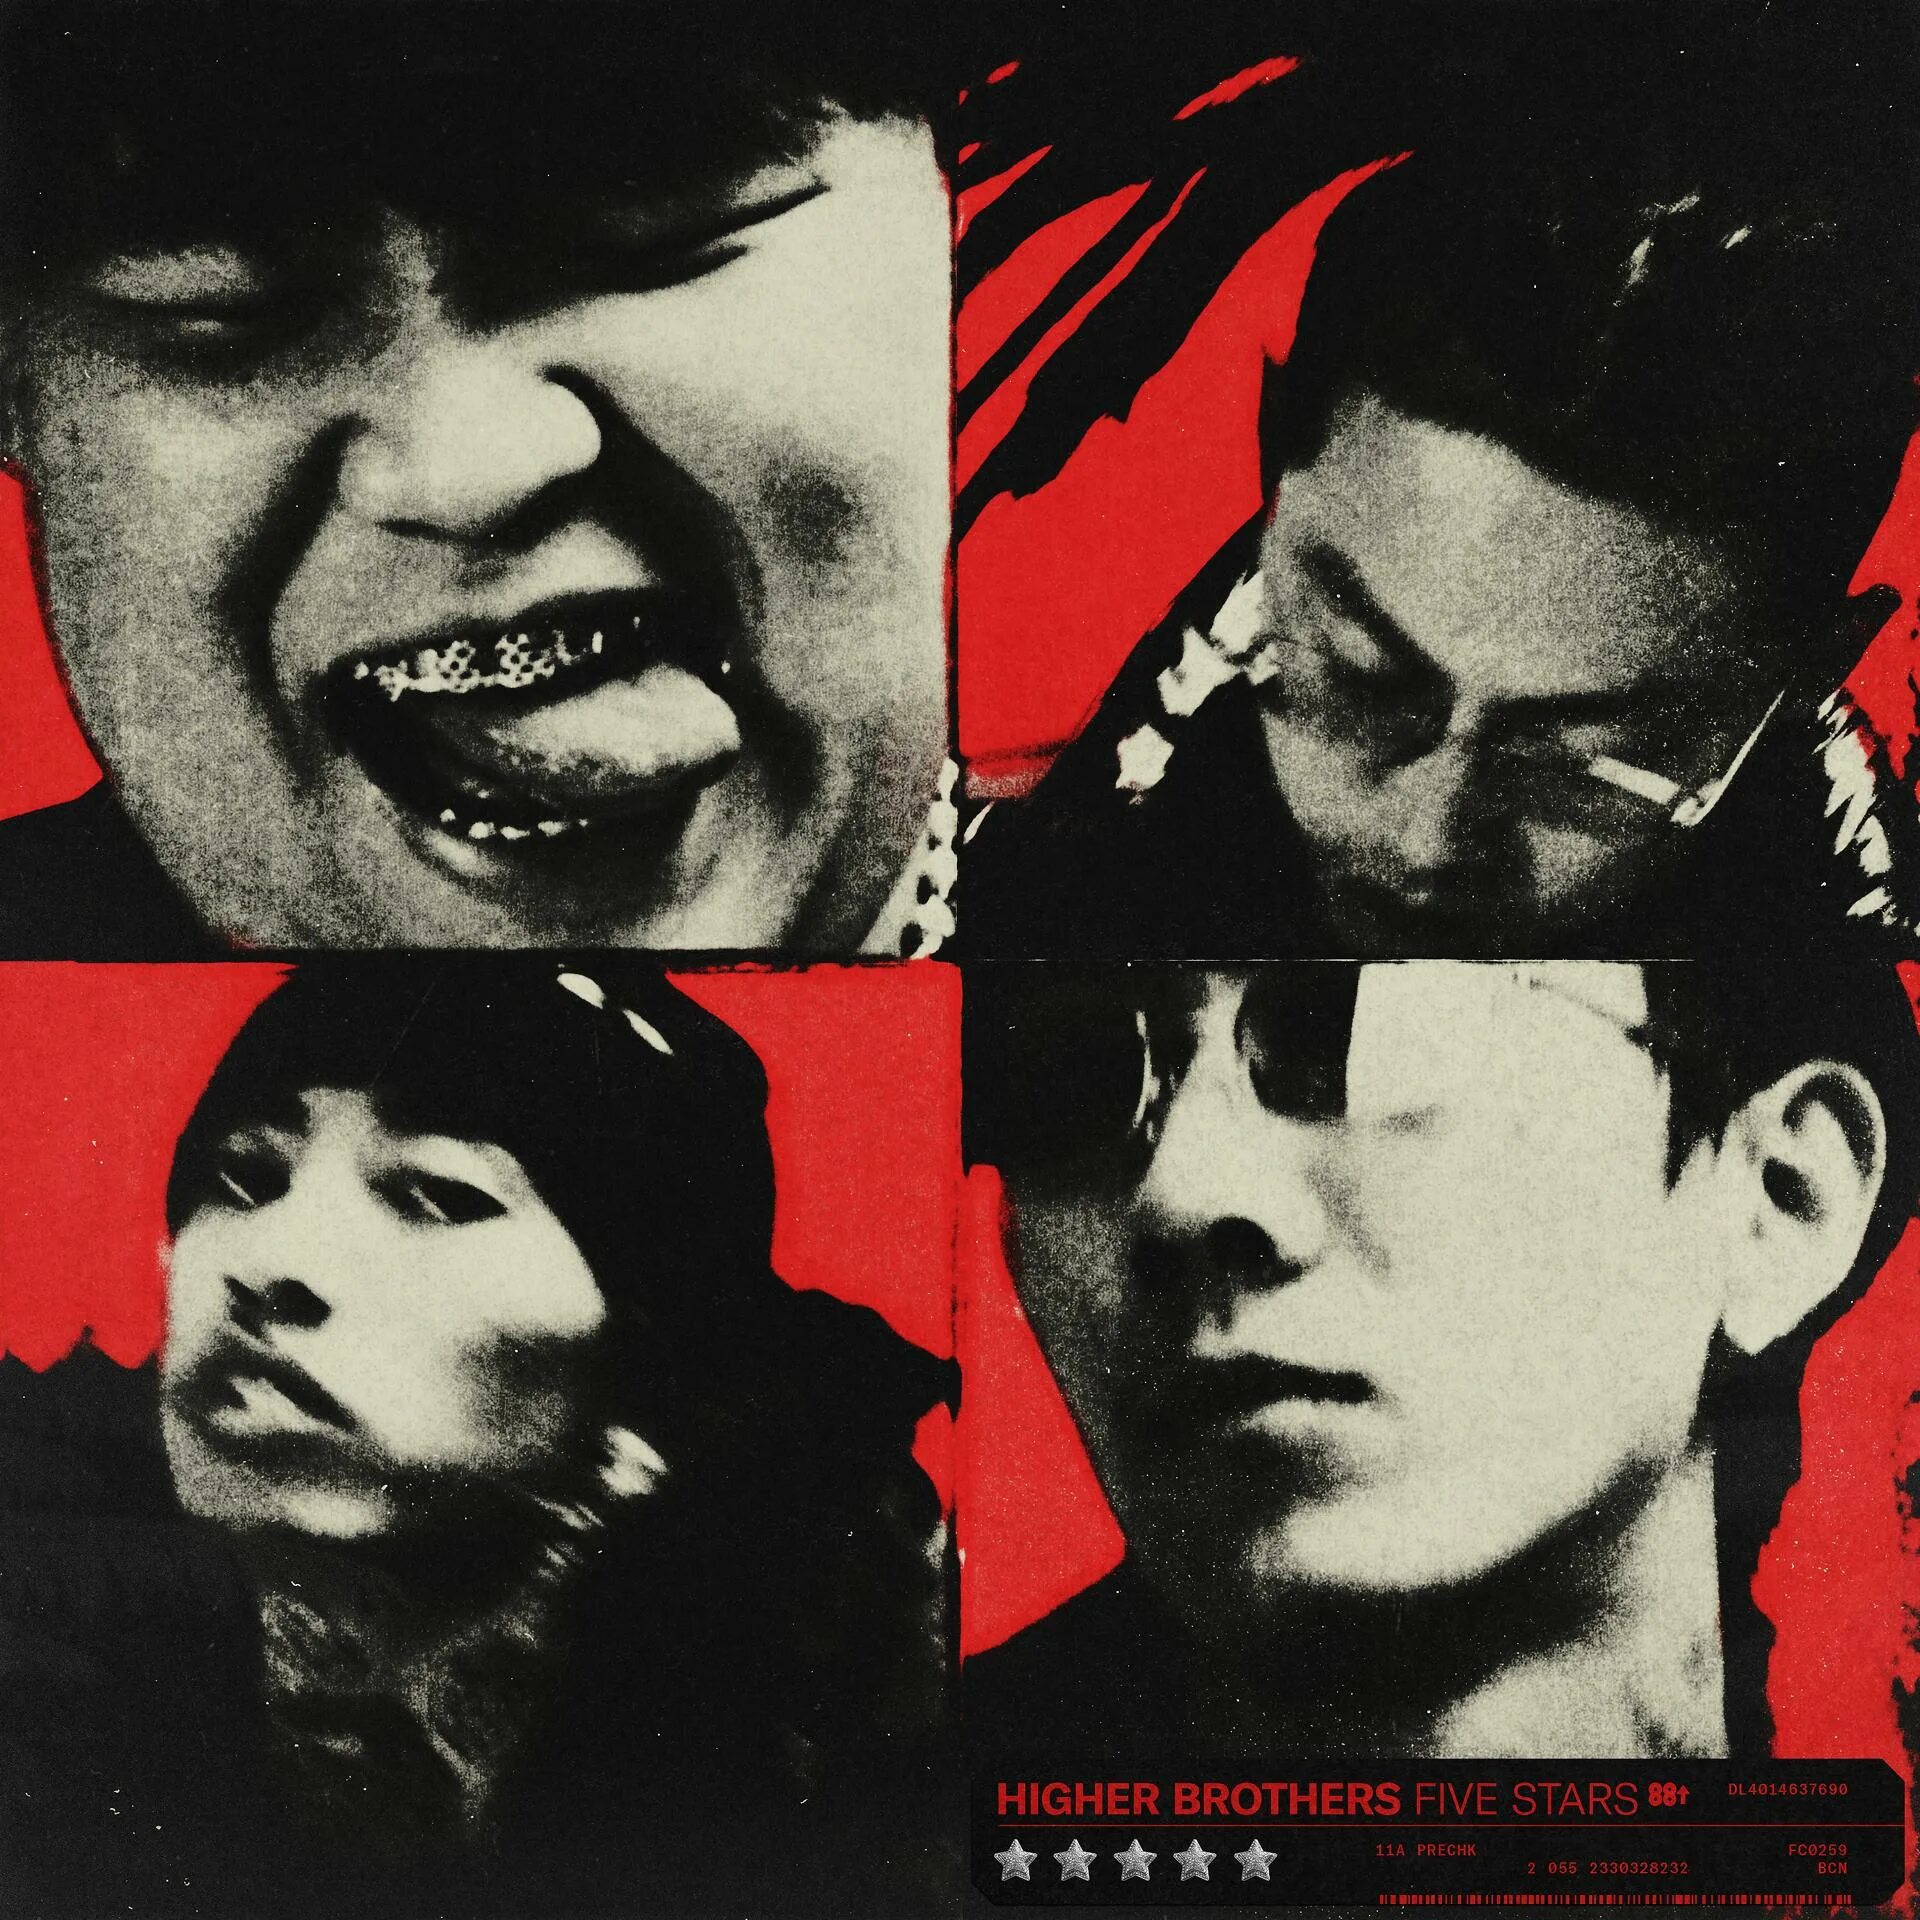 Higher brothers 2022. Five Star альбомы. Melo higher brothers.